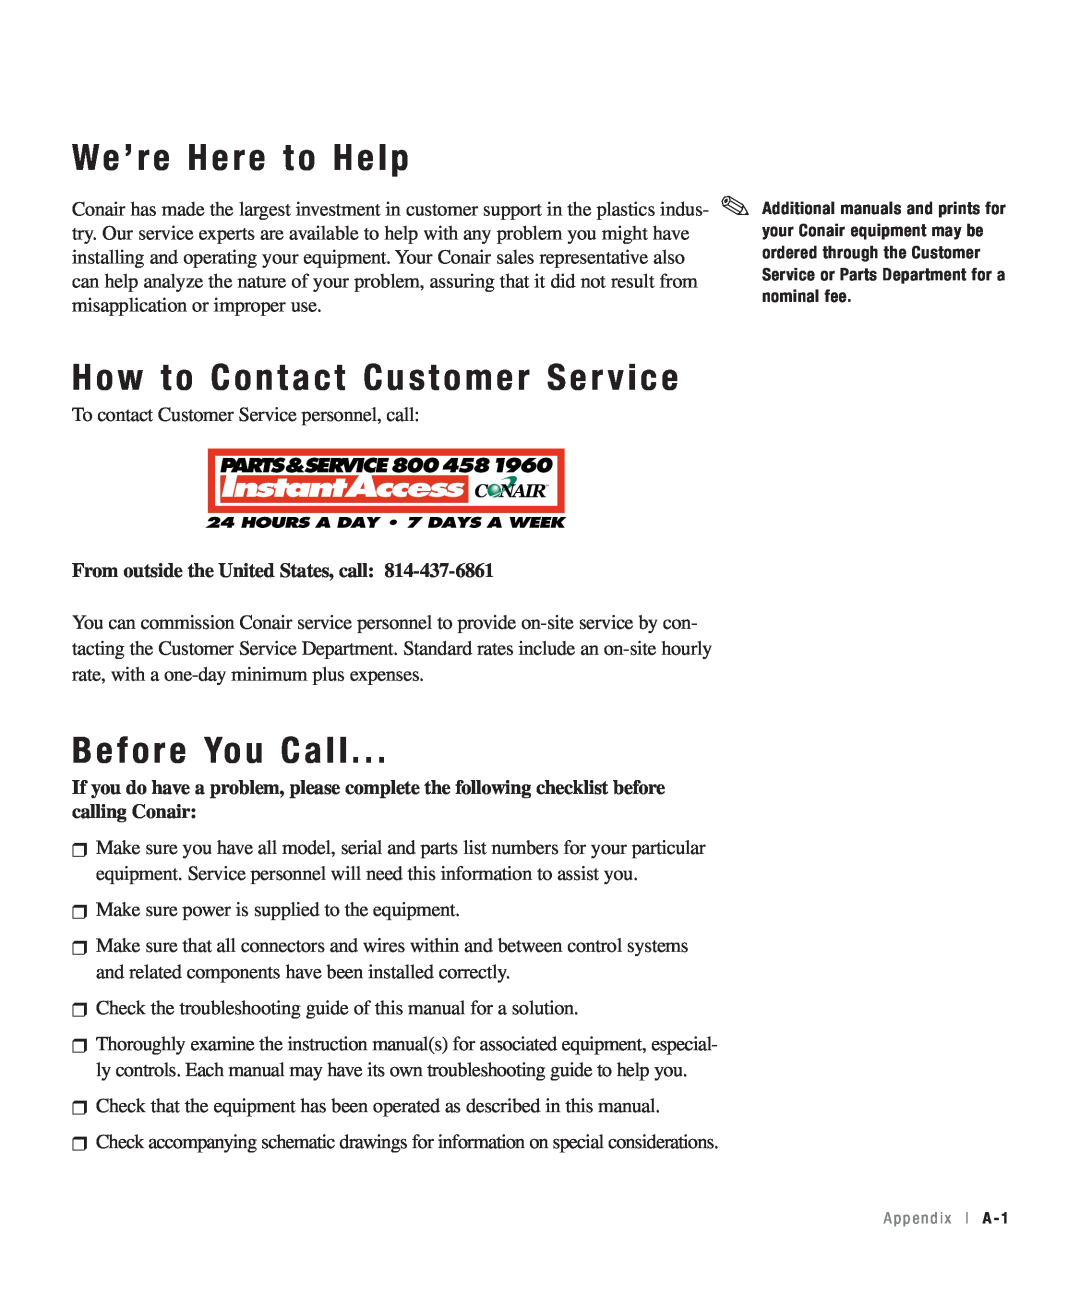 Conair CHS-810 We’re Here to Help, How to Contact Customer Ser vice, Before You Call, From outside the United States, call 